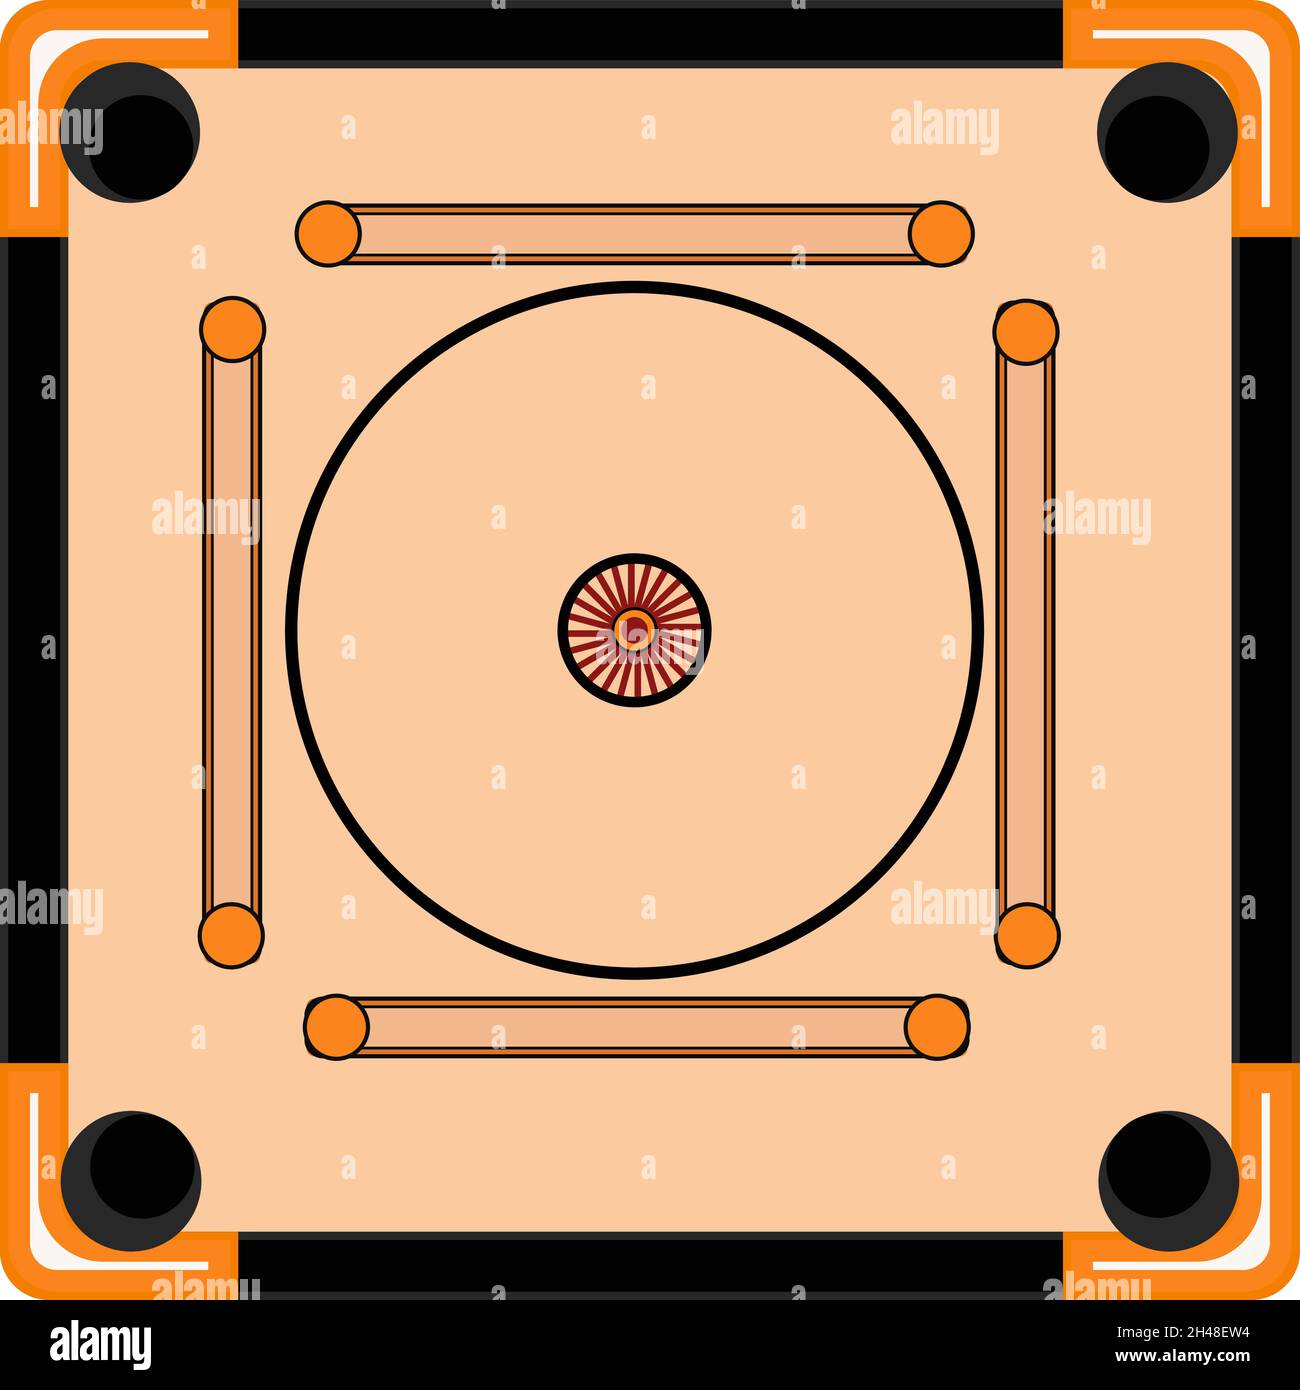 Carrom board Cut Out Stock Images & Pictures - Alamy